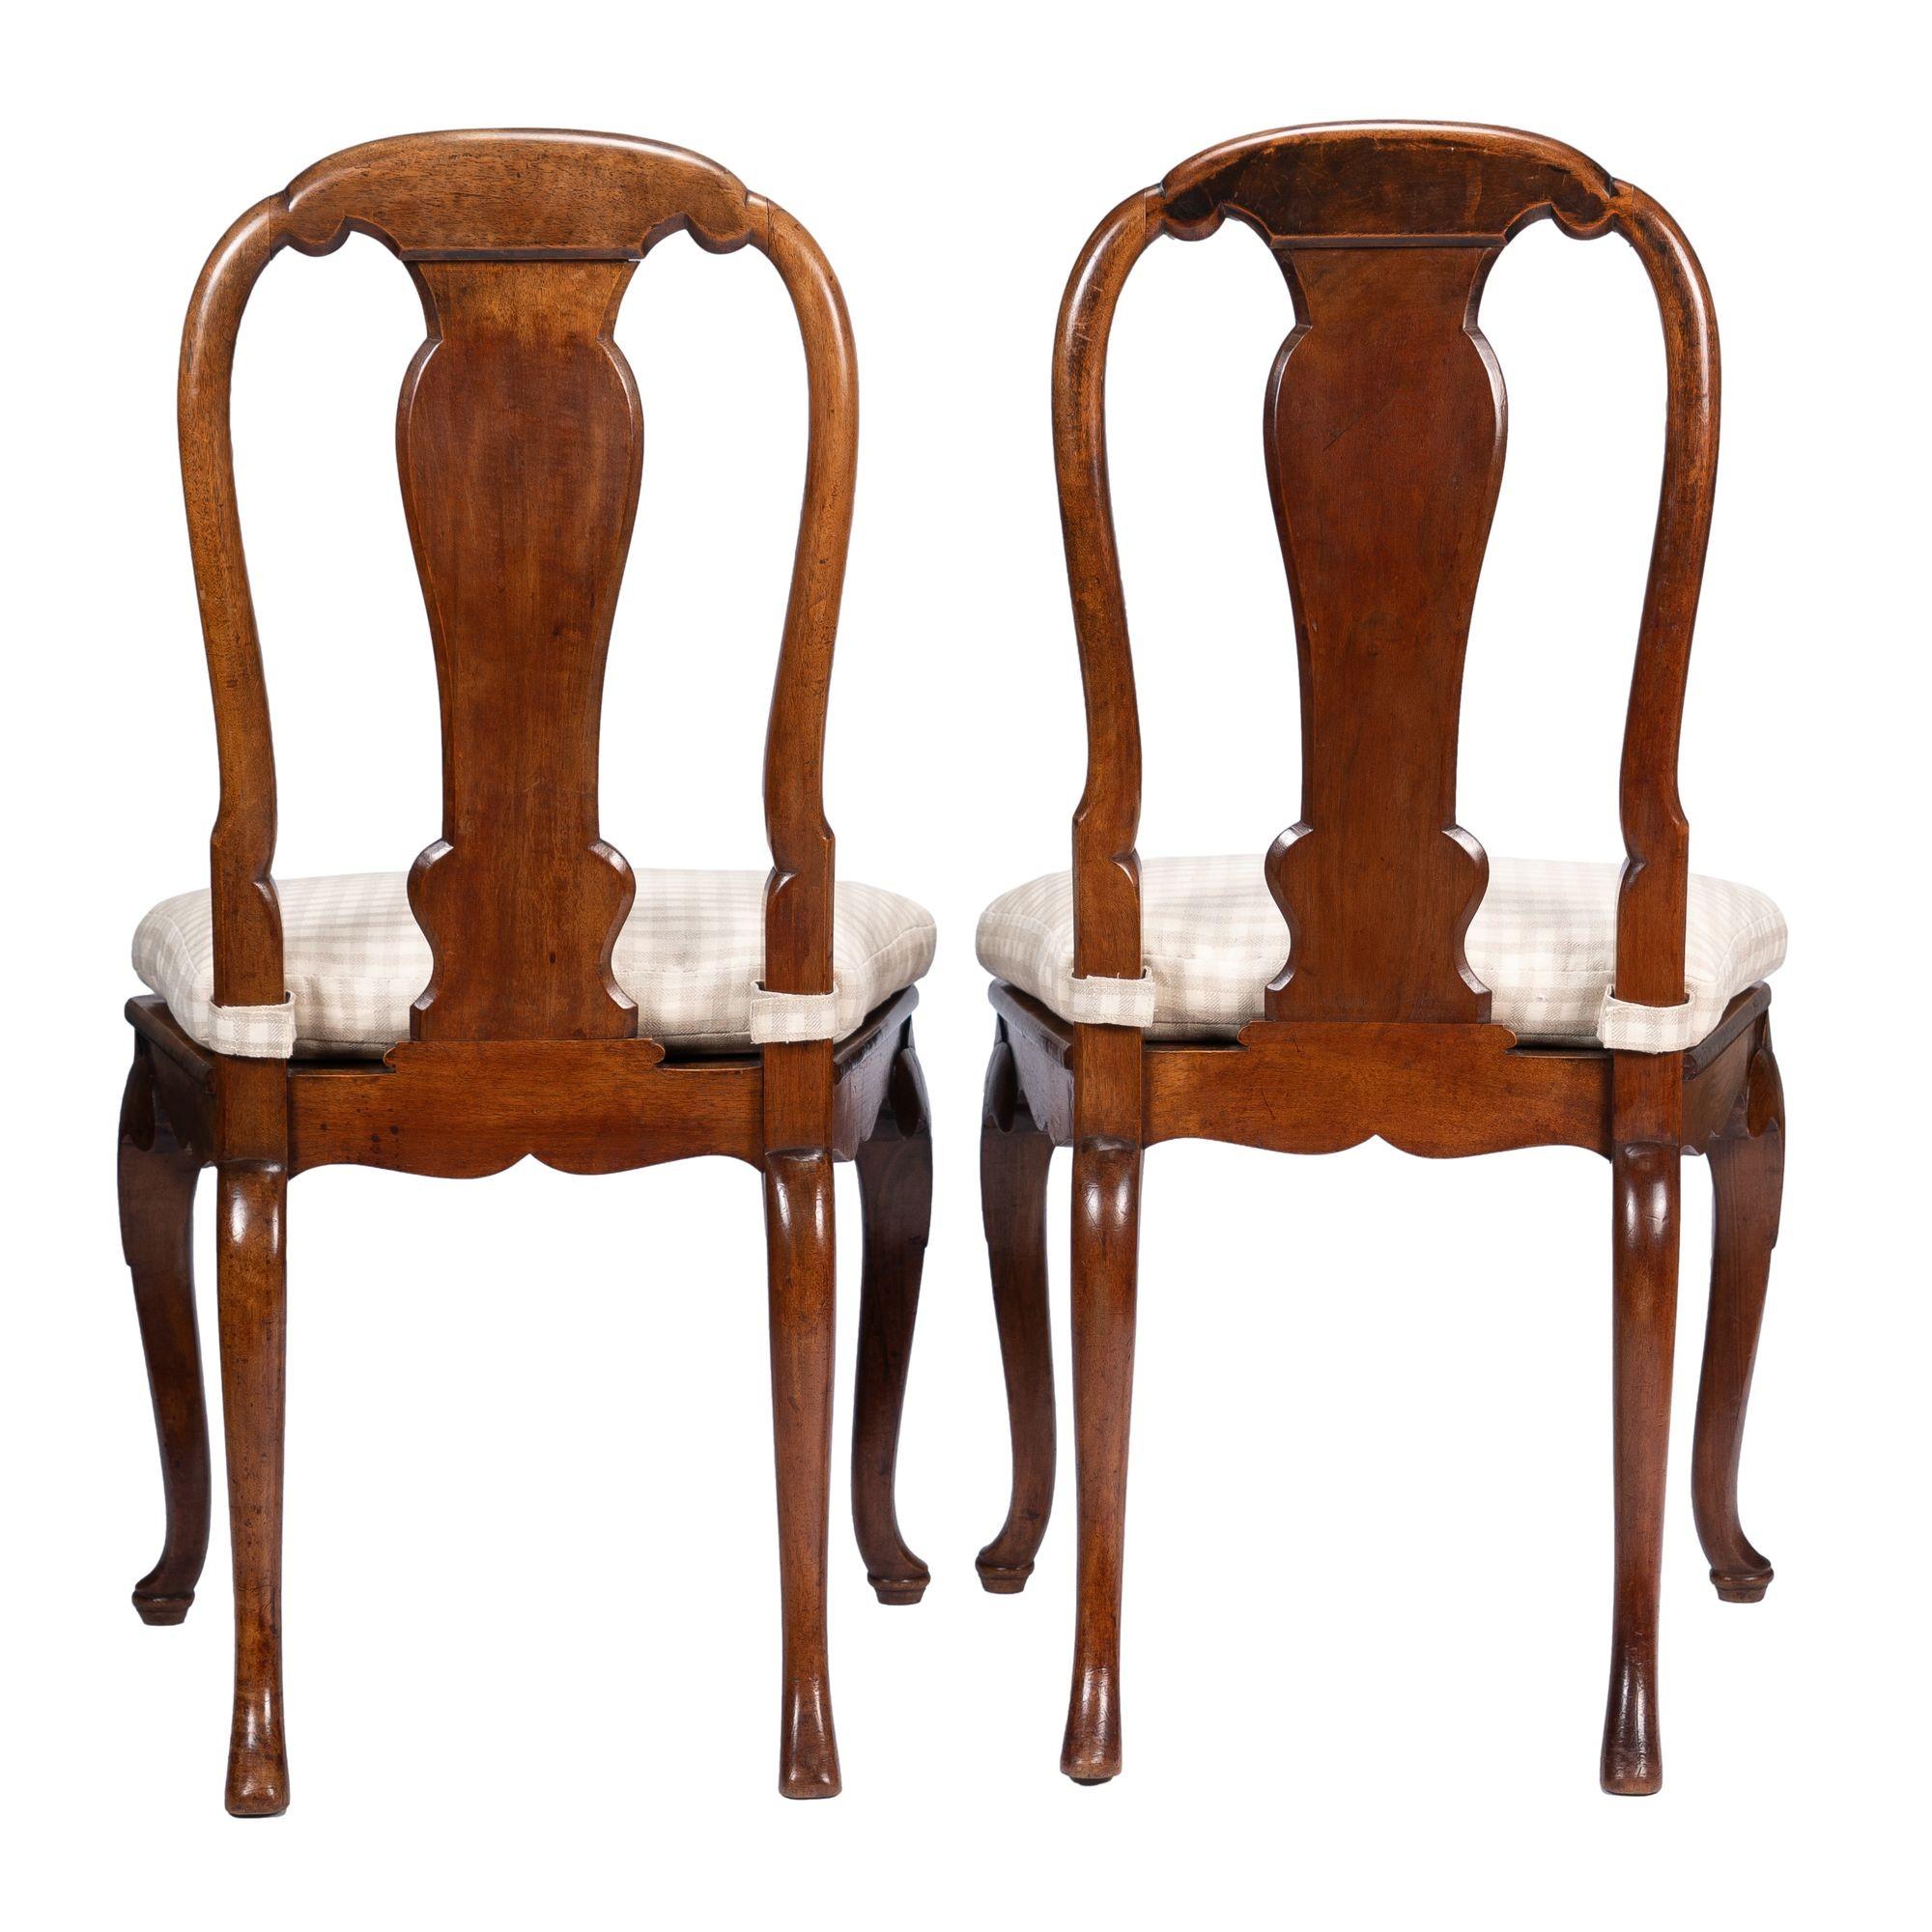 Pair of French Louis XV Walnut Plank Seat Hall Chairs on Cabriole Legs, 1800s For Sale 1